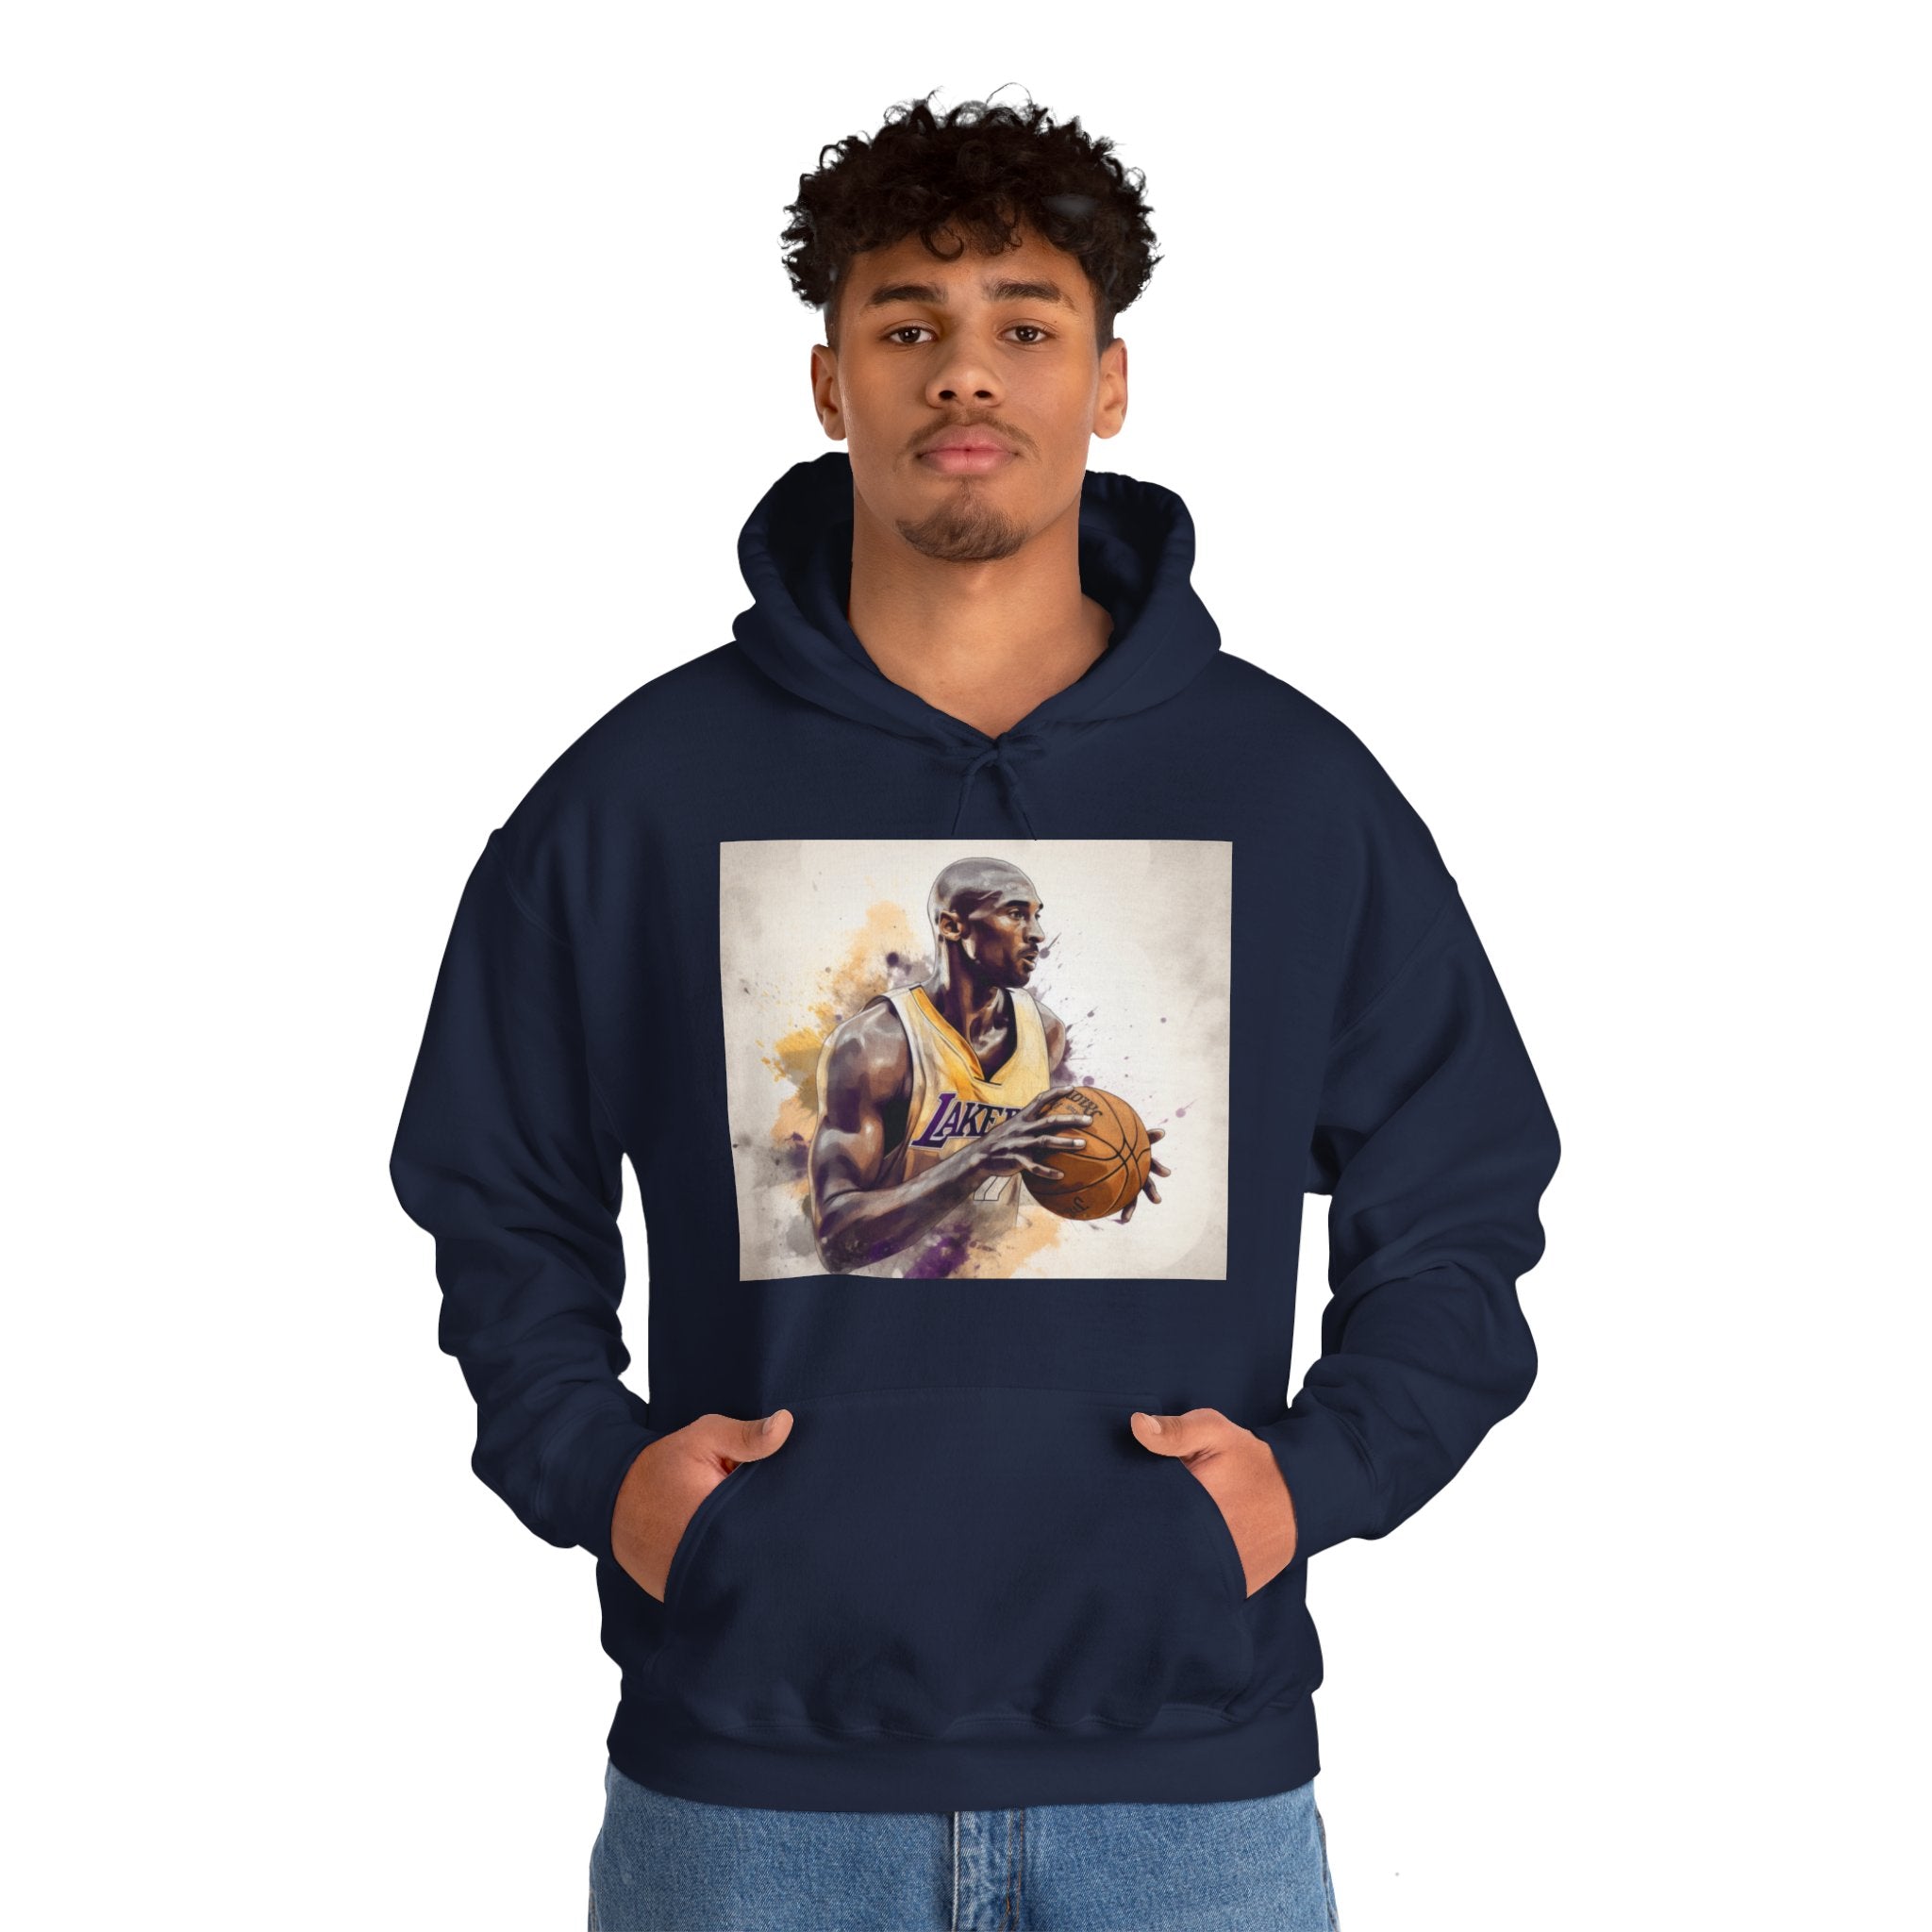 Imagine a hoodie that combines the intensity of a thunderstorm with the legendary Black Mamba. The front is adorned with striking lightning art, seamlessly blending with the iconic image of a mamba poised to strike. Its vibrant colors stand out against the hoodie's sleek black background, creating an electrifying visual effect.